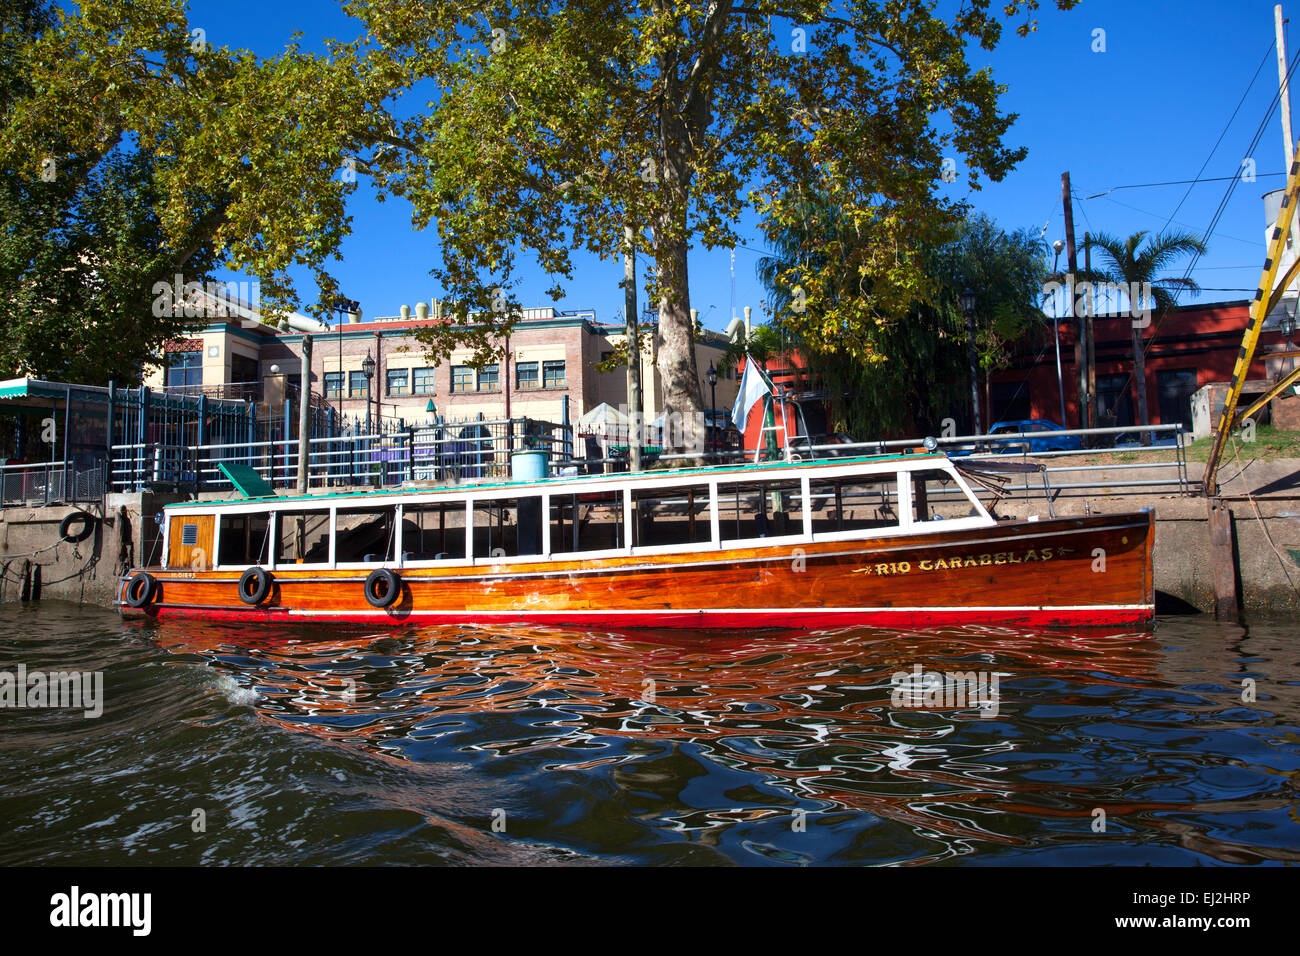 Wooden passengers boat (Lancha colectiva). Tigre, Buenos Aires